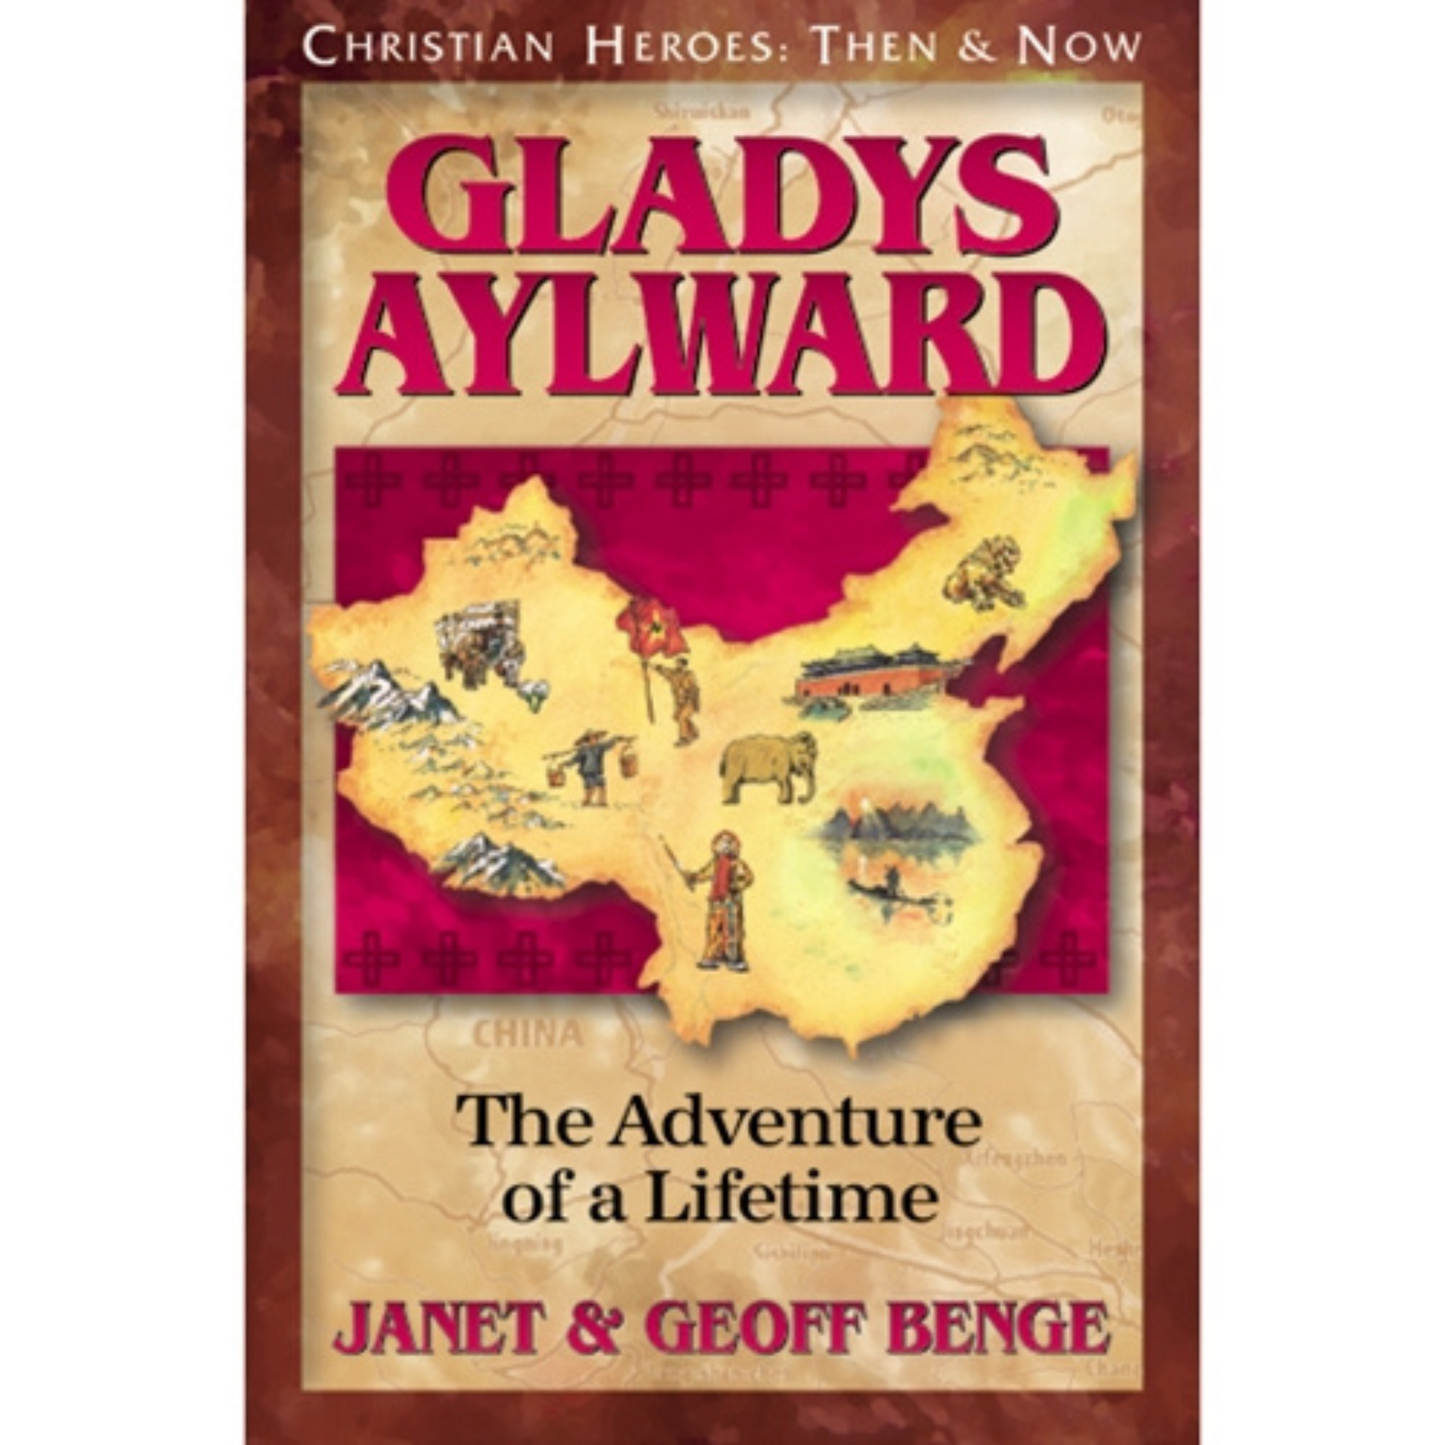 CHRISTIAN HEROES: THEN & NOW : Gladys Aylward